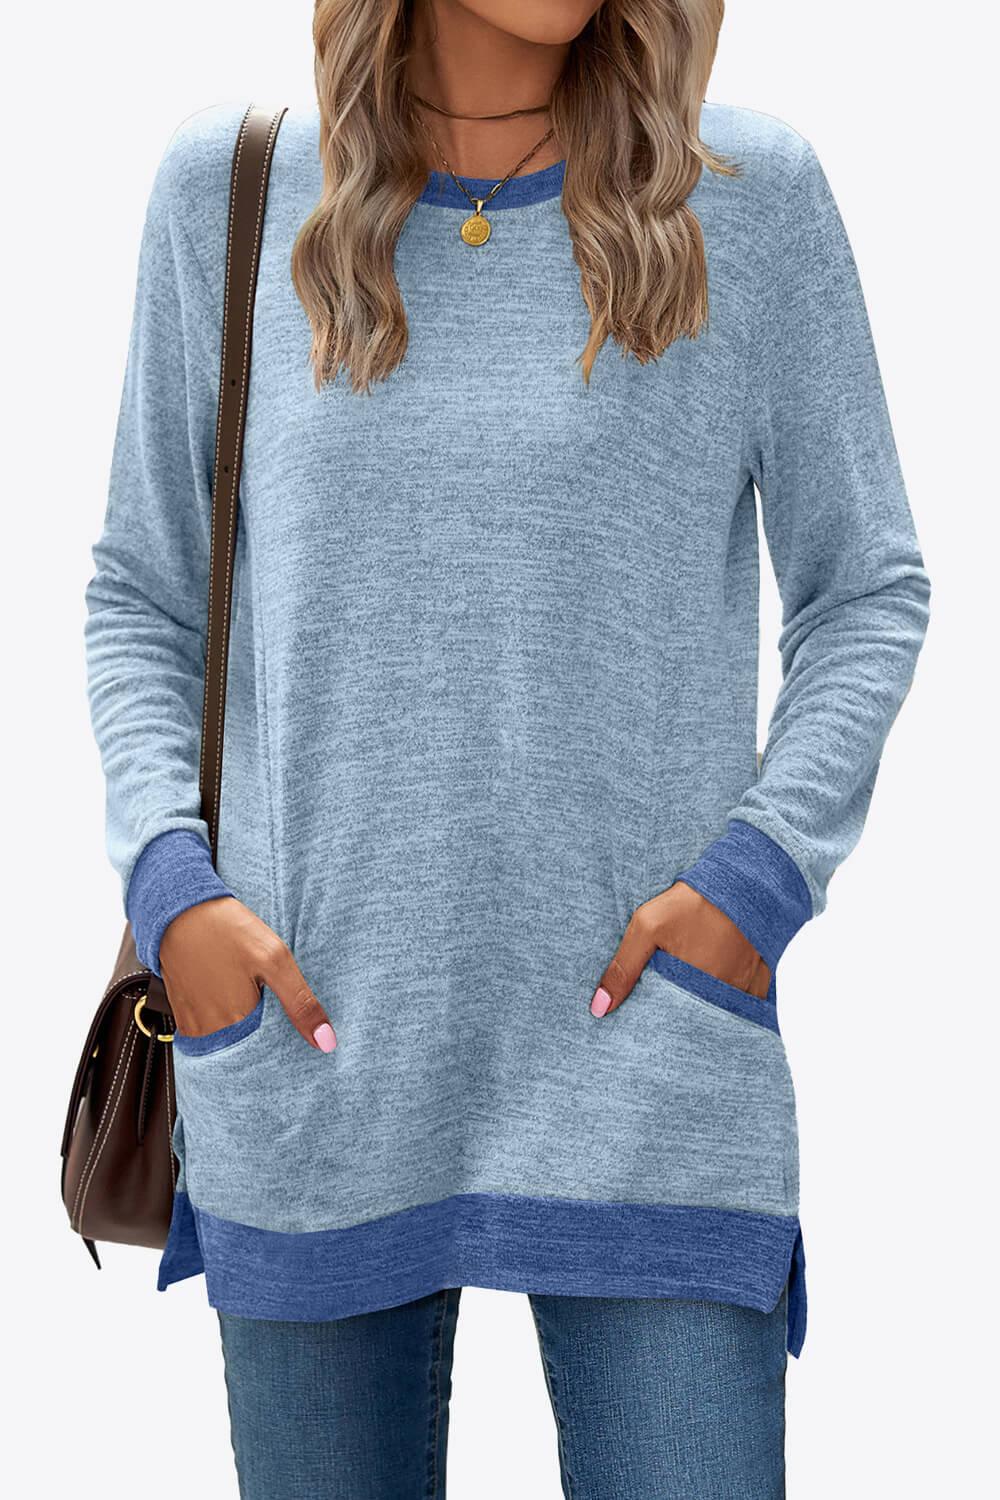 Heathered Slit Top with Pockets - T-Shirts - Shirts & Tops - 30 - 2024